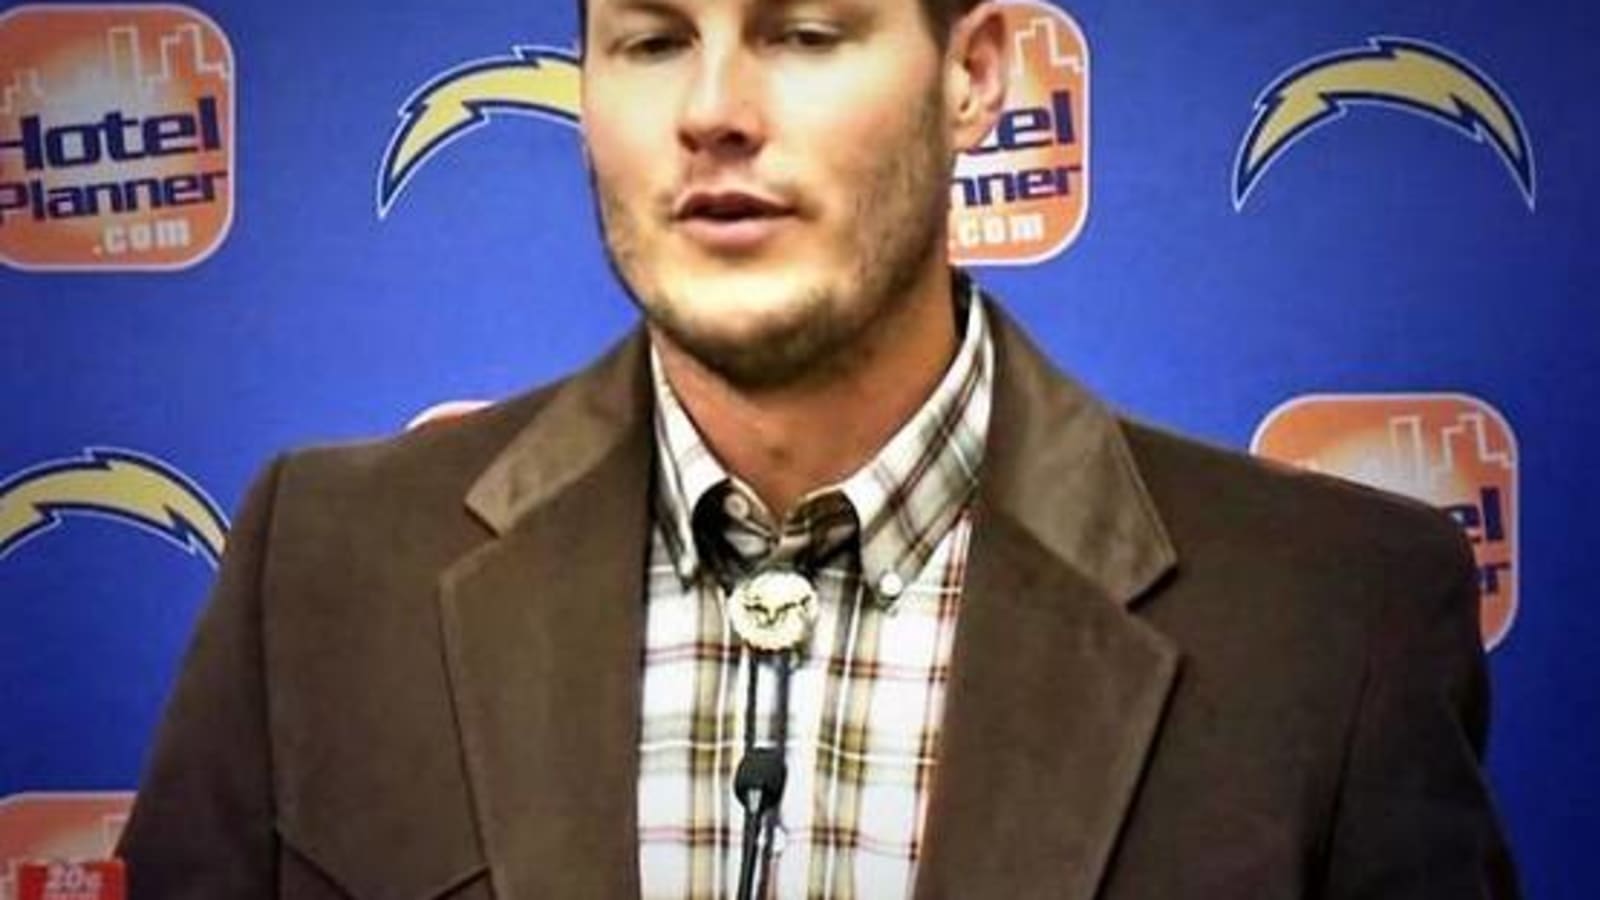 Phillip Rivers' famous bolo tie was given to him by a fan